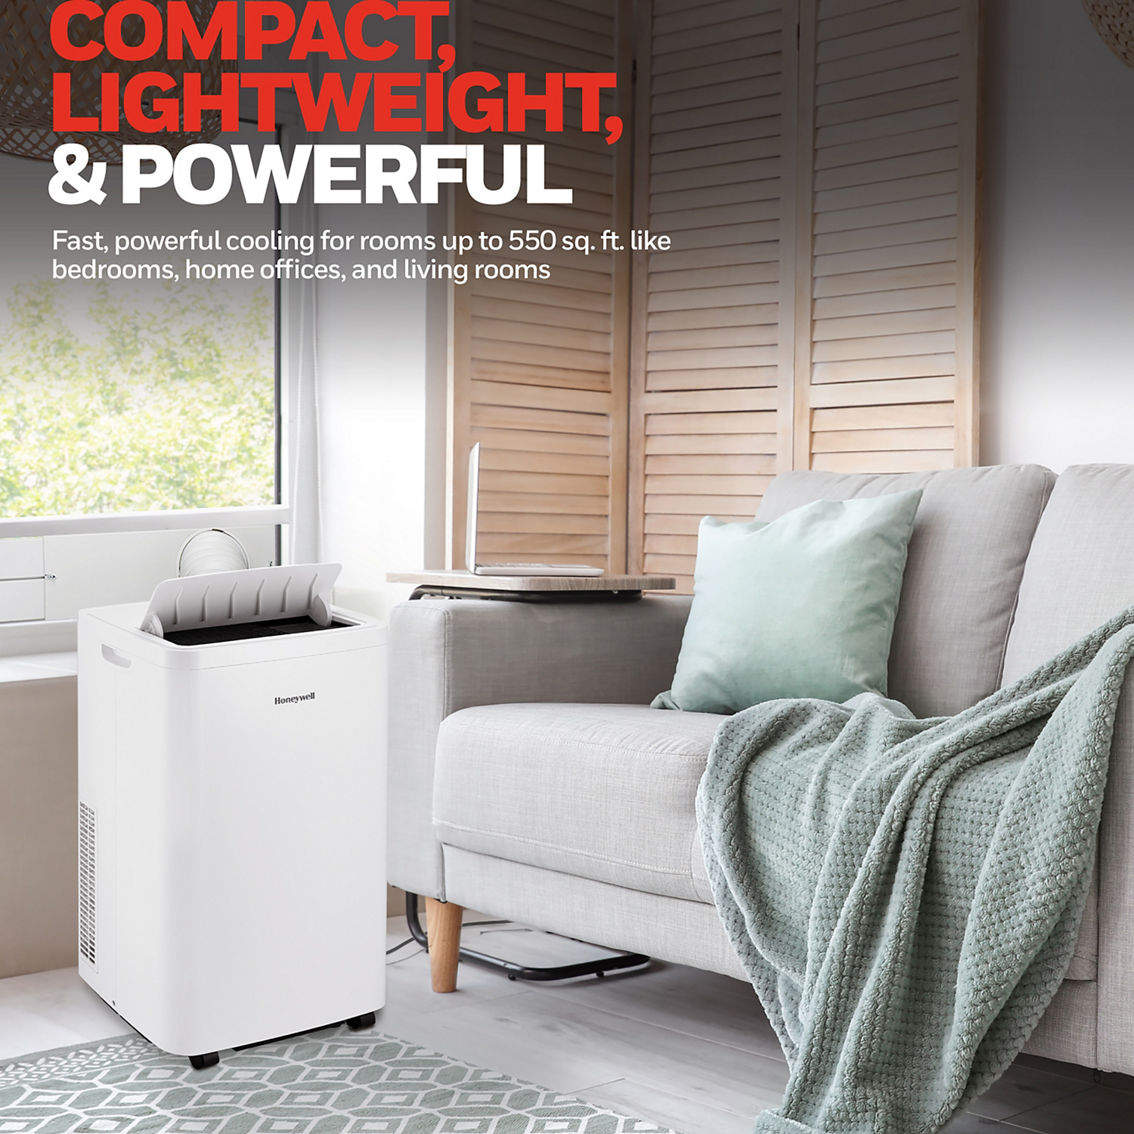 Honeywell 12,000 BTU Portable Air Condition with Dehumidifier and Fan in White - Image 8 of 9